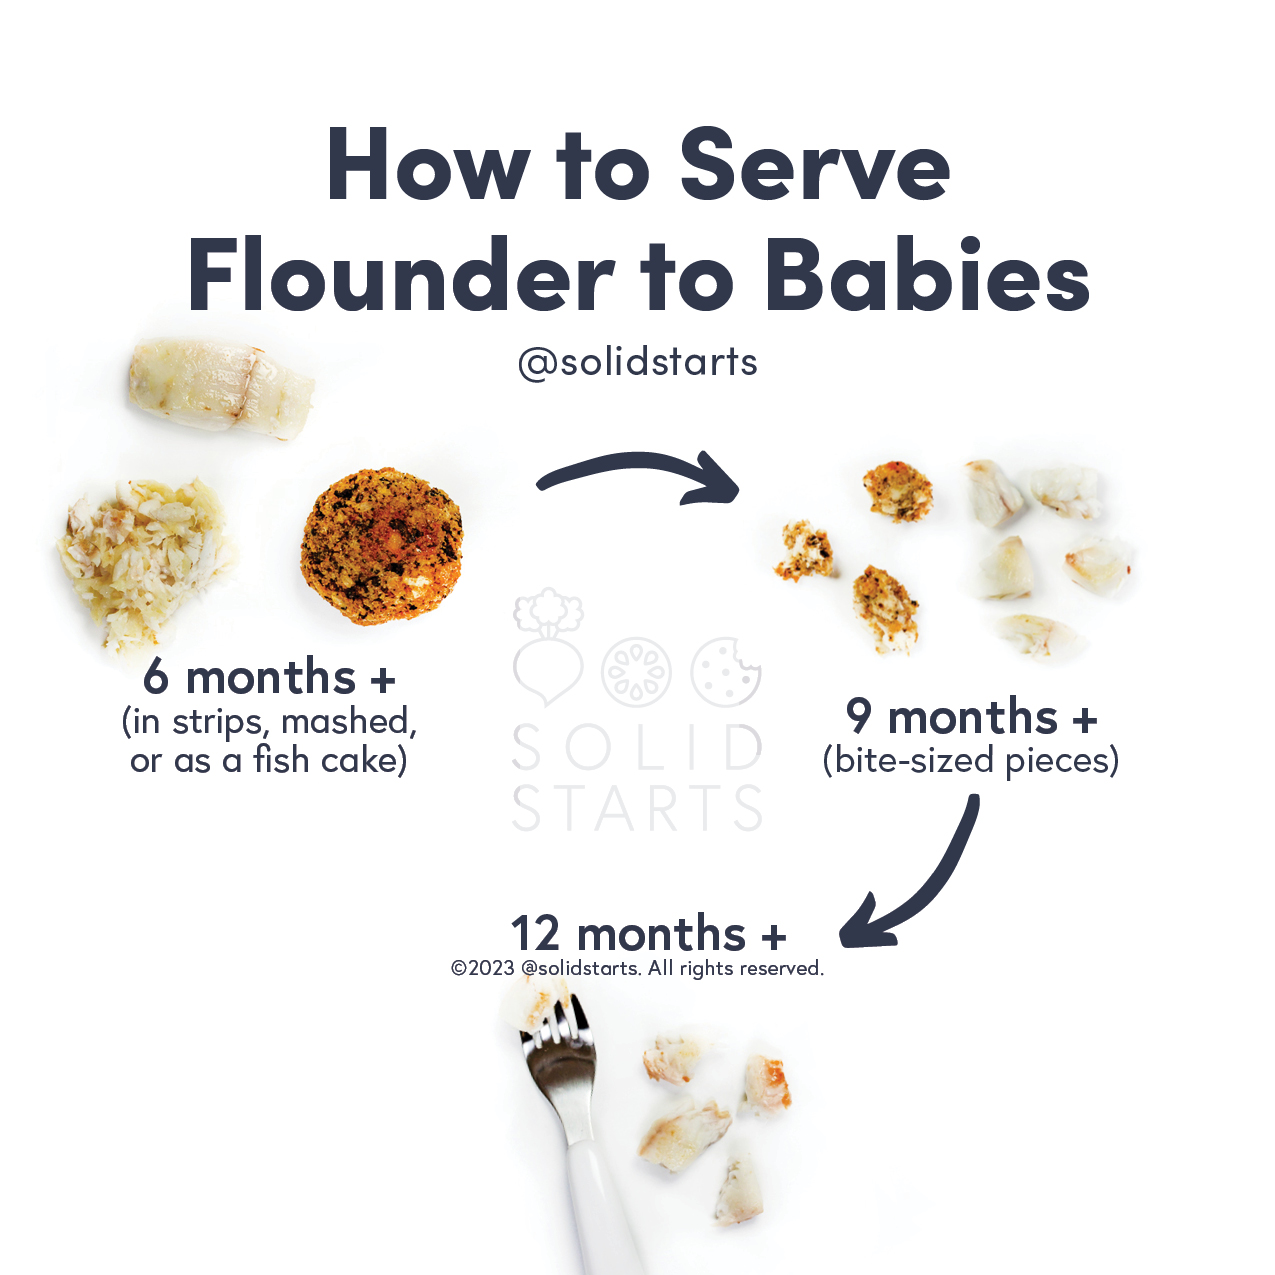 25 Foods Never to Feed Your Baby - Solid Starts